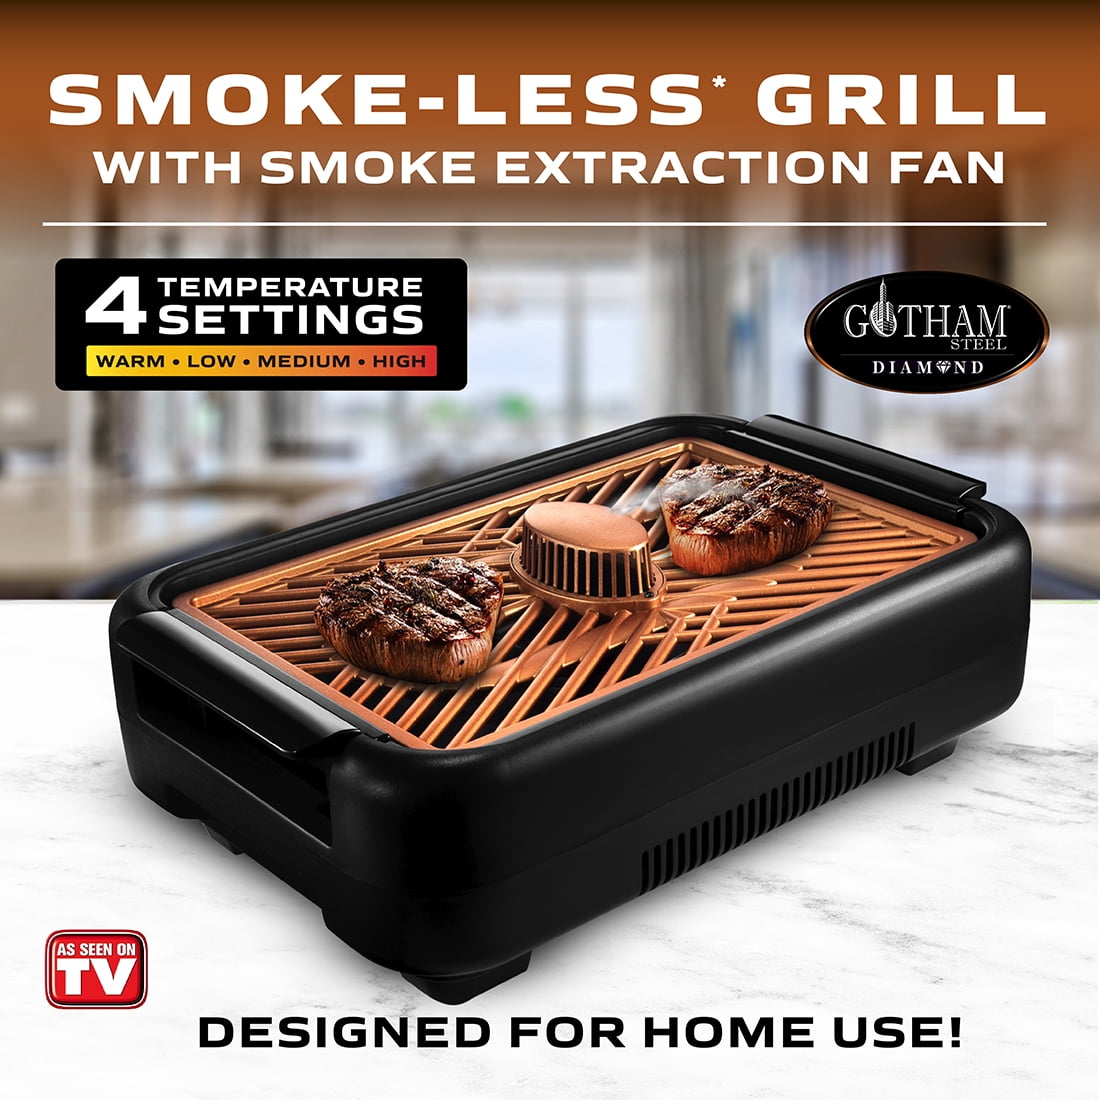 Details about   Gotham Steel Smokeless Electric Indoor Grill Nonstick & Portable Small 